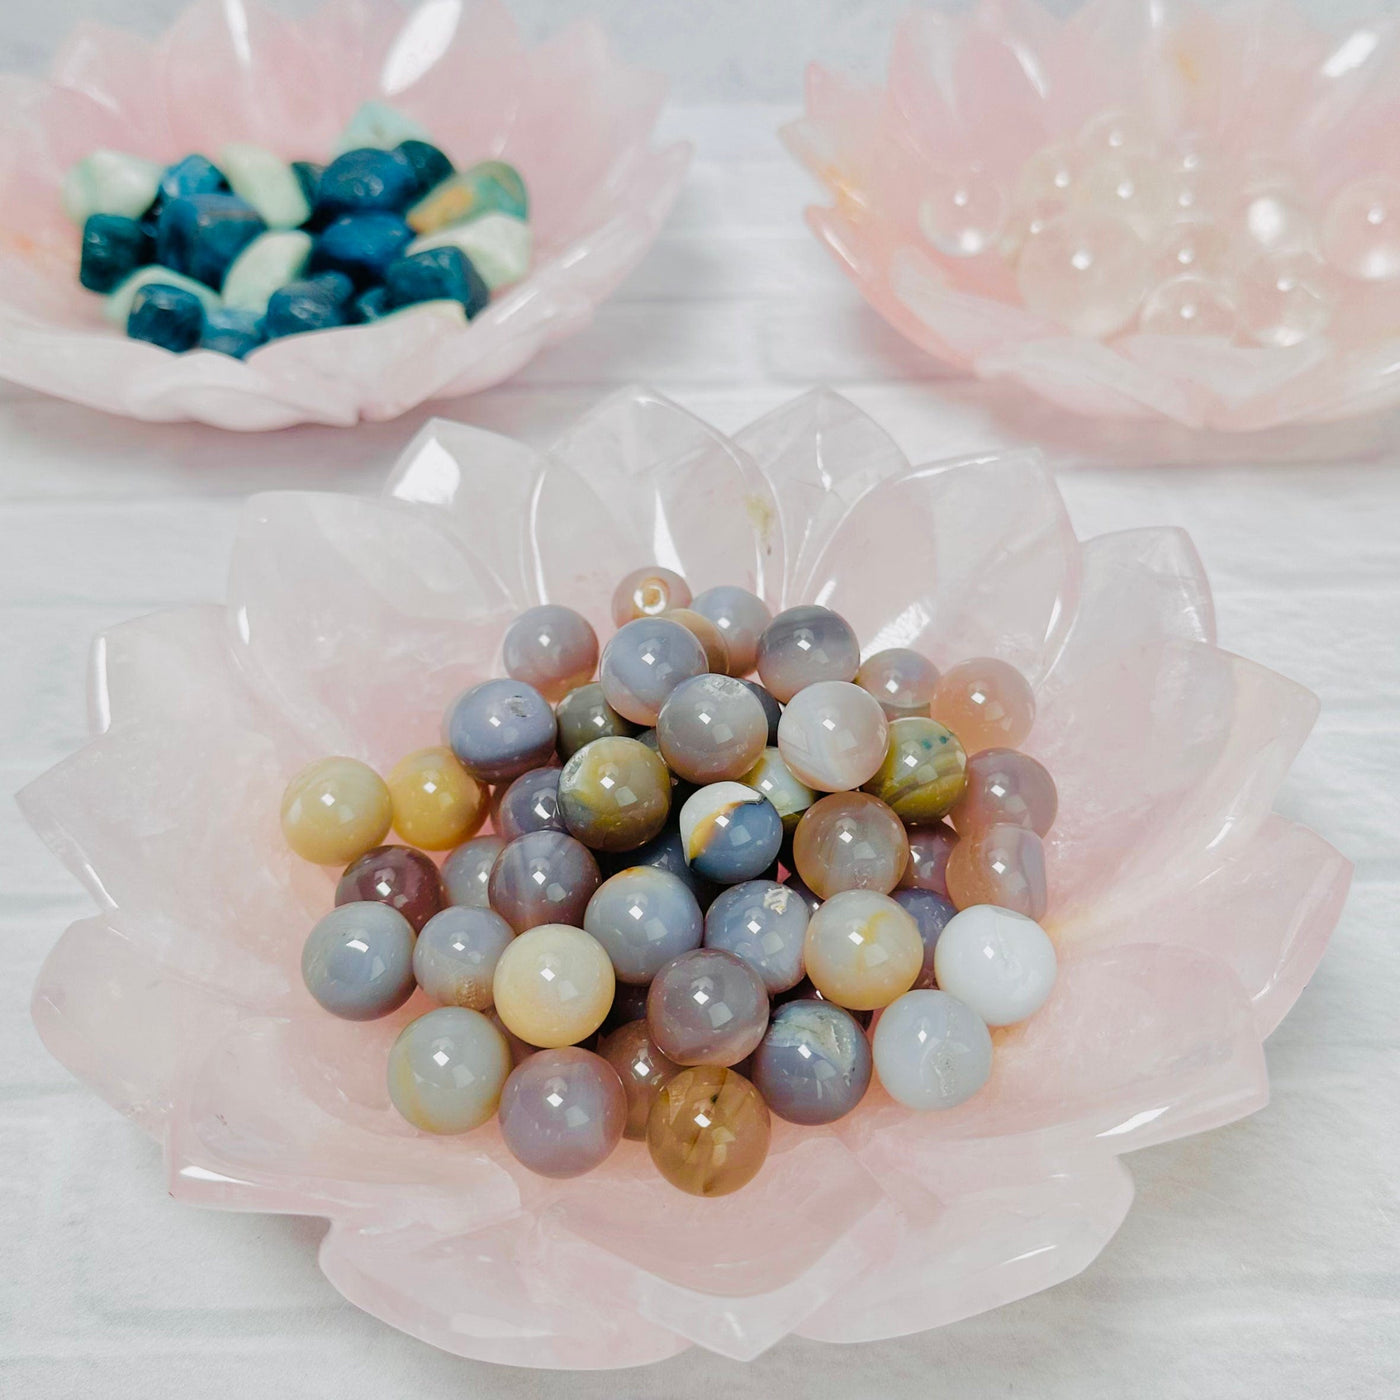 3 Rose Quartz Lotus Bowls displayed with small stones in them.